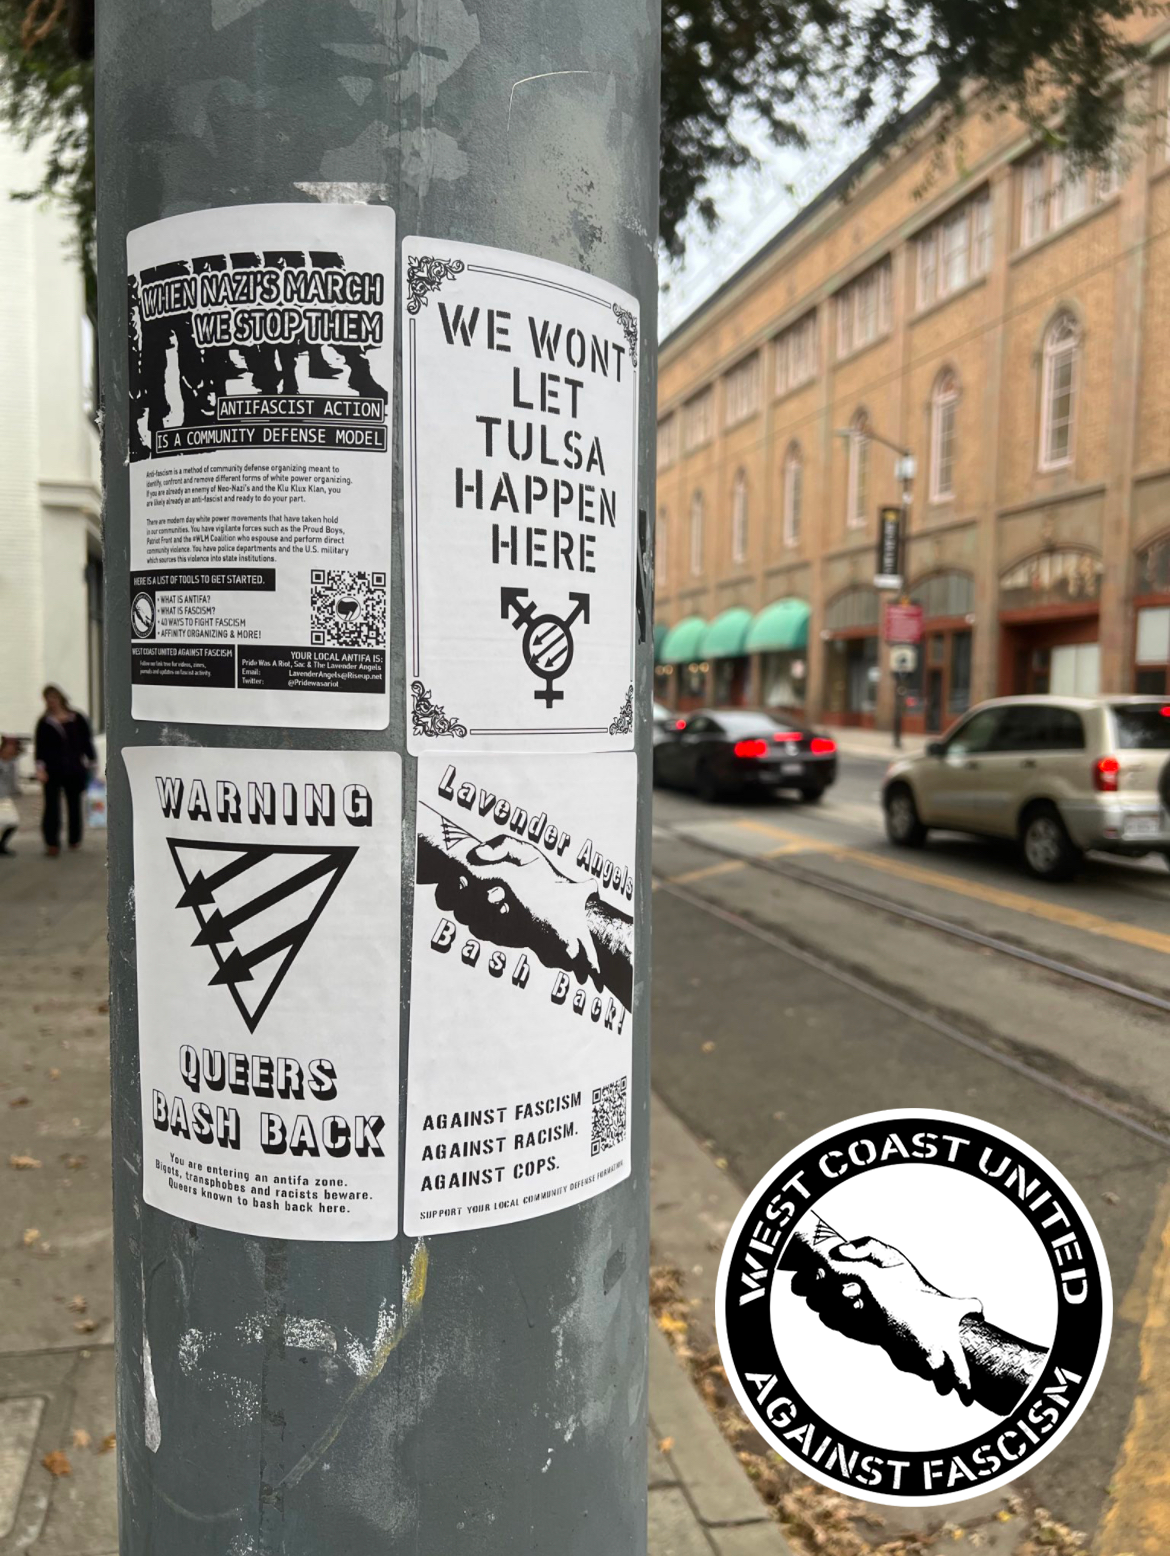 A metal post has four flyers adheared to it. The background appears to be city traffic with tall buildings surrounding it. Flyers are posted two by two. Top left reads "When Nazis March We Stop Them. Antifascist Action Is A Community Defense Model." with various text. Bottom Left reads "Warning, Queers Bash Back." with a Queer Front symbol across it. Top right reads, "We Wont Let Tulsa Happen Here." with a Trans Front symbol on it. Bottom right has two people locking harms which reads "Lavender Angels Bash Back. Against Fascism, Against Racism, Against Cops."